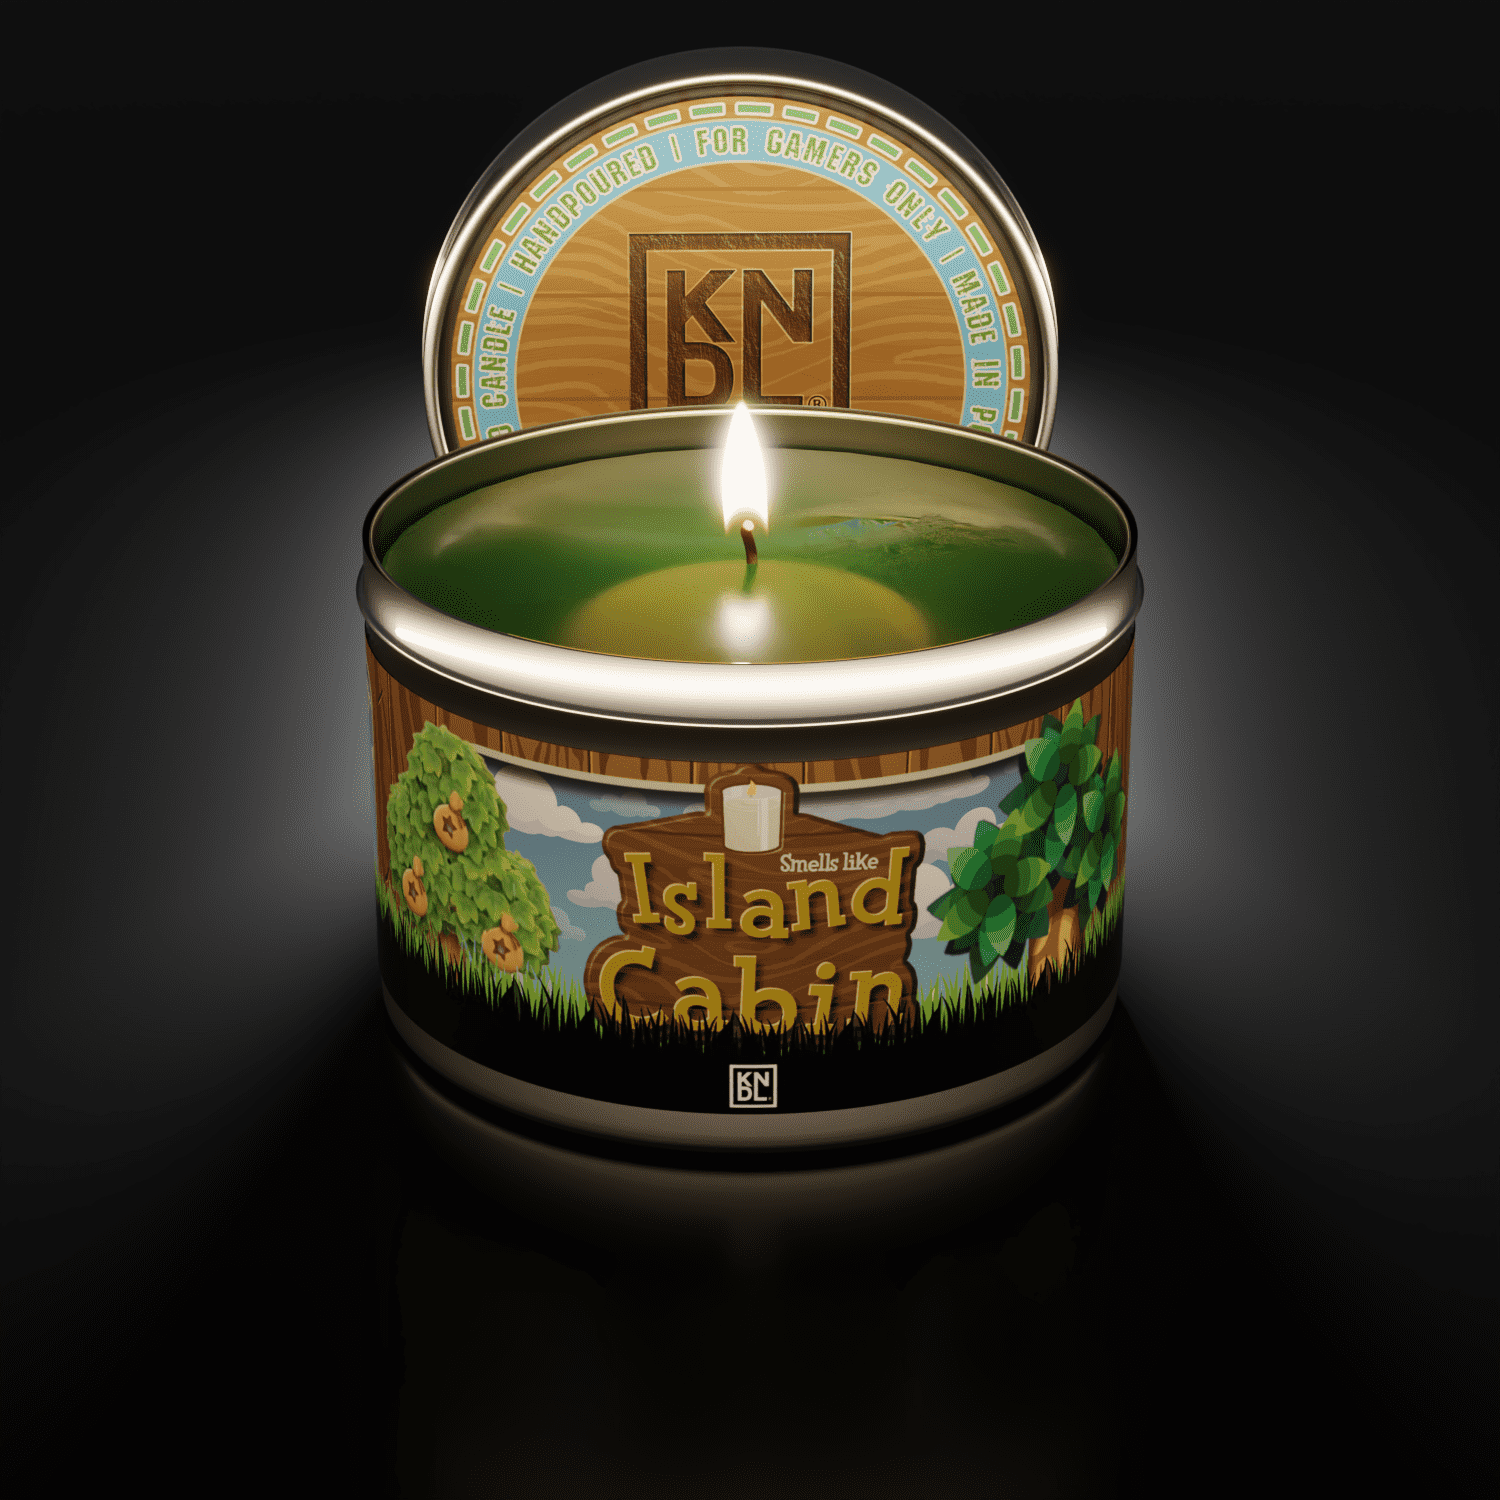 TIN NR 13 | ISLAND CABIN | ANIMAL CROSSING INSPIRED SCENTED CANDLE